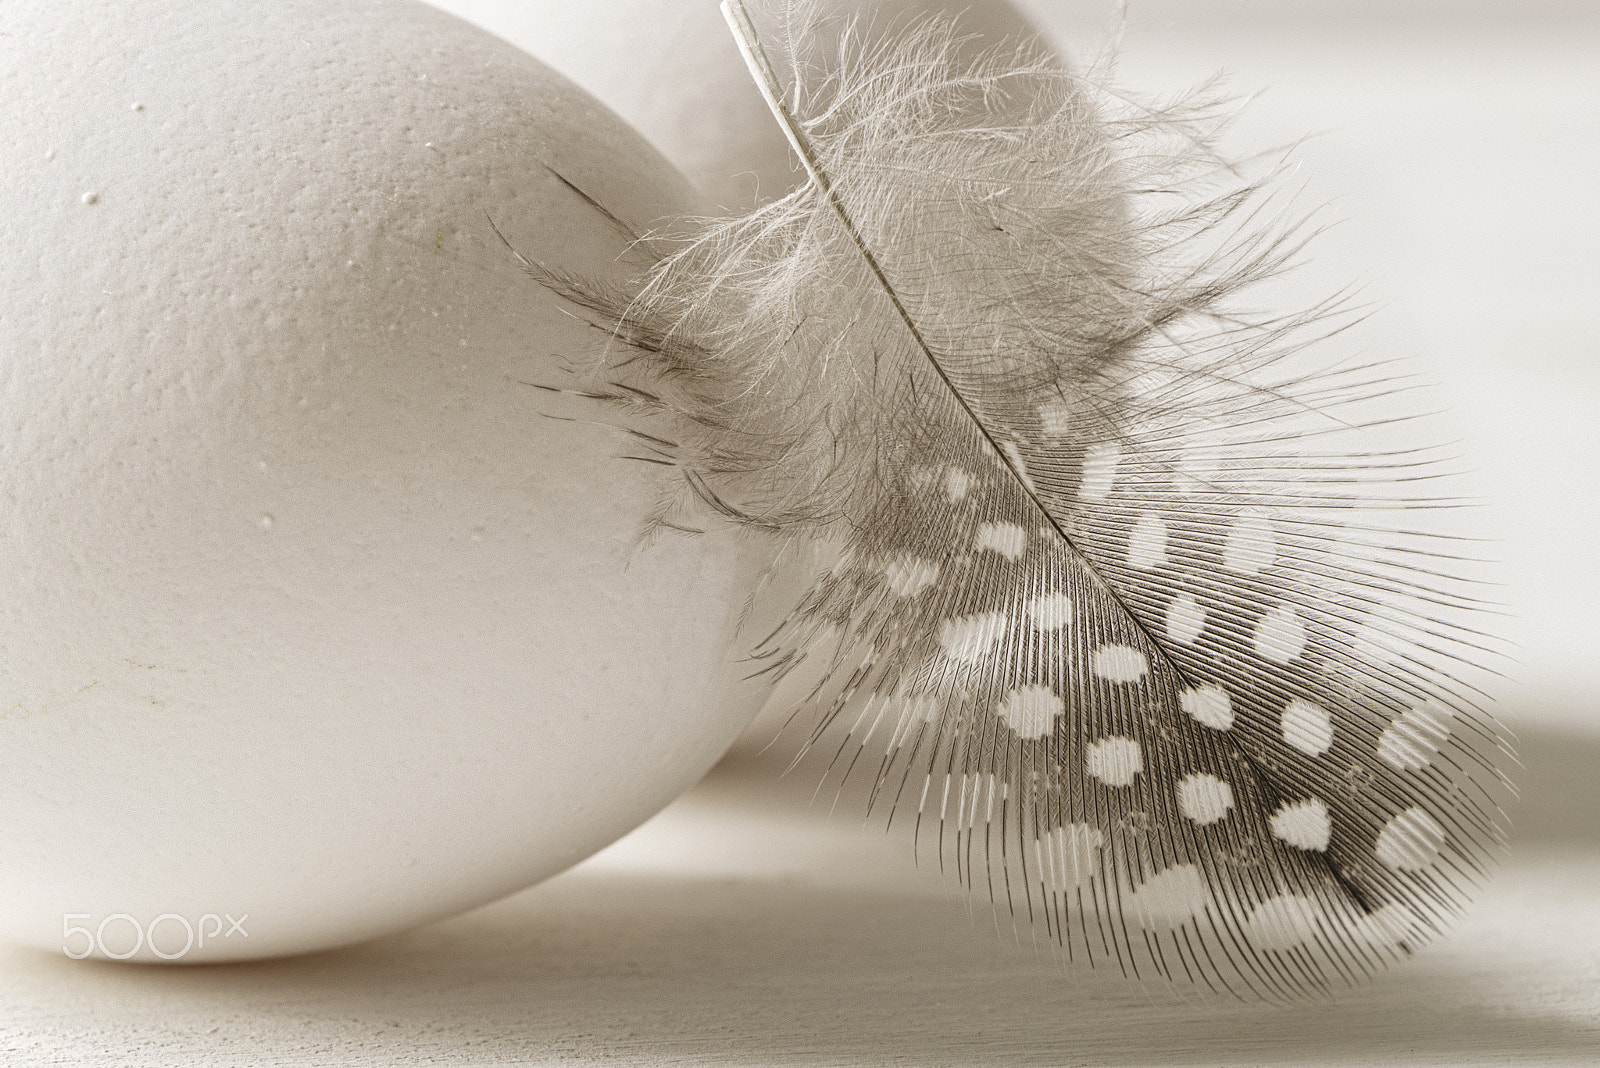 Nikon D600 + Nikon AF-S Micro-Nikkor 105mm F2.8G IF-ED VR sample photo. Eggs and a feather photography